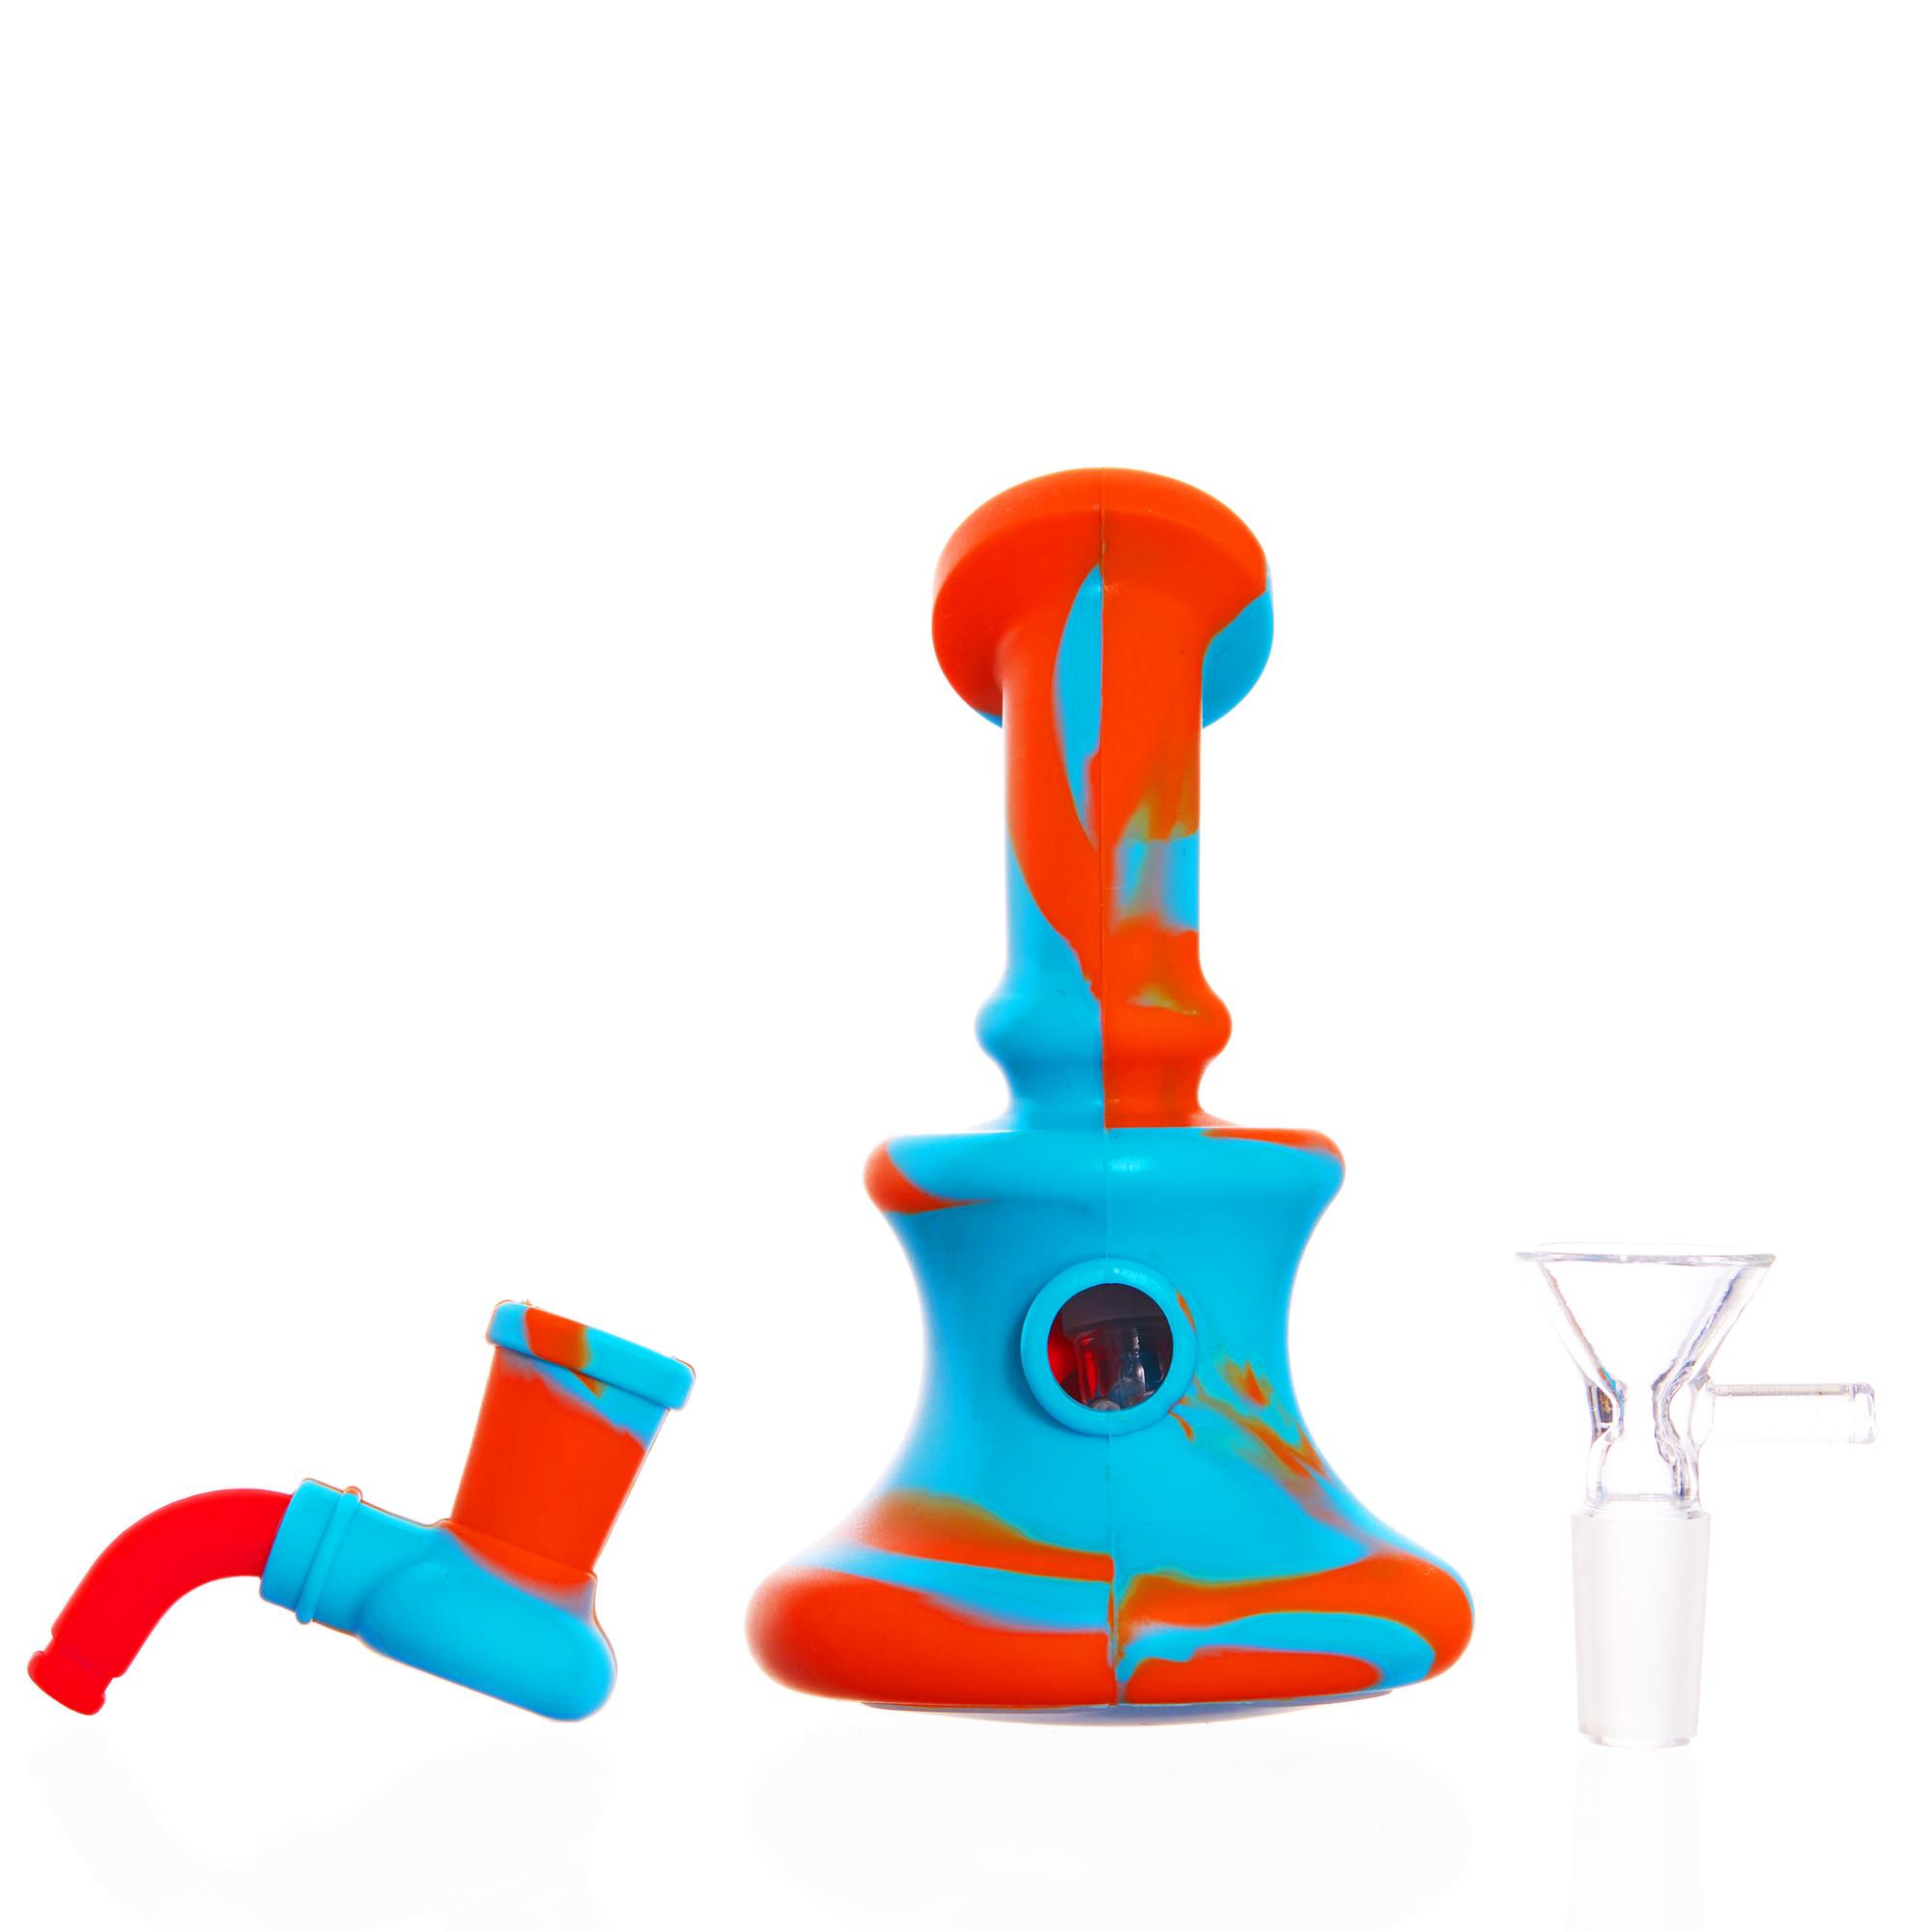 LEANING SILICONE BONG